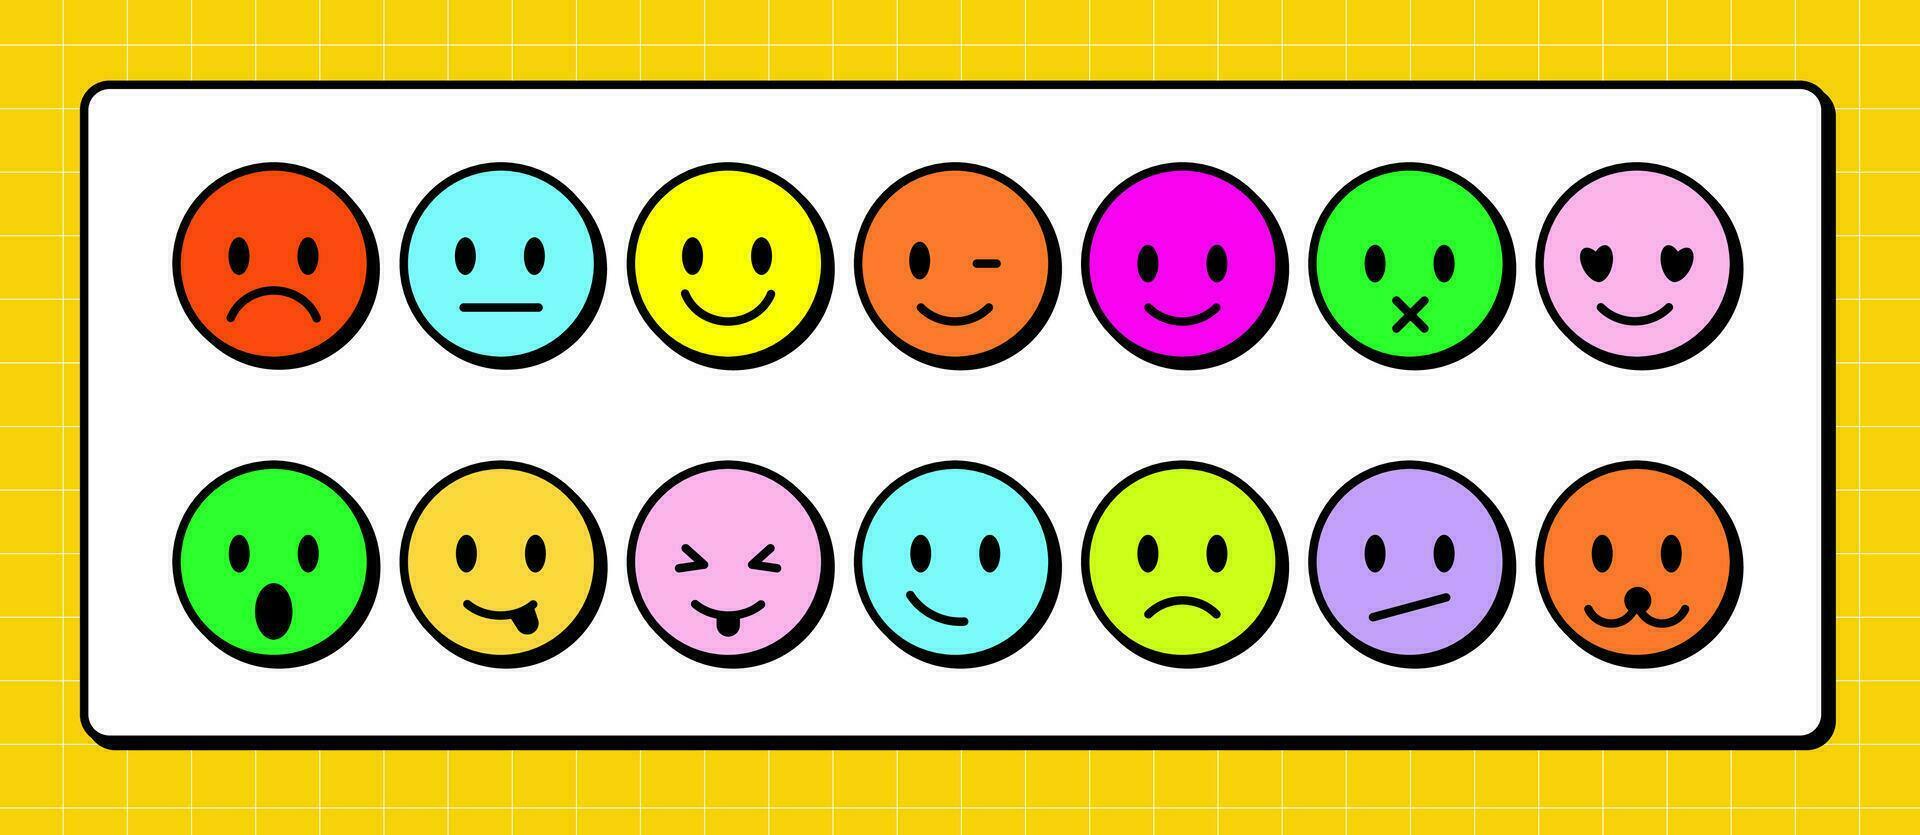 Neubrutalism emoticon smile icon set. Cartoon neobrutalism emoji - sad, smile, love, scary, etc. Bold aesthetic pack in trendy bright style - contrast stroke and shadow. Isolated vector illustration.